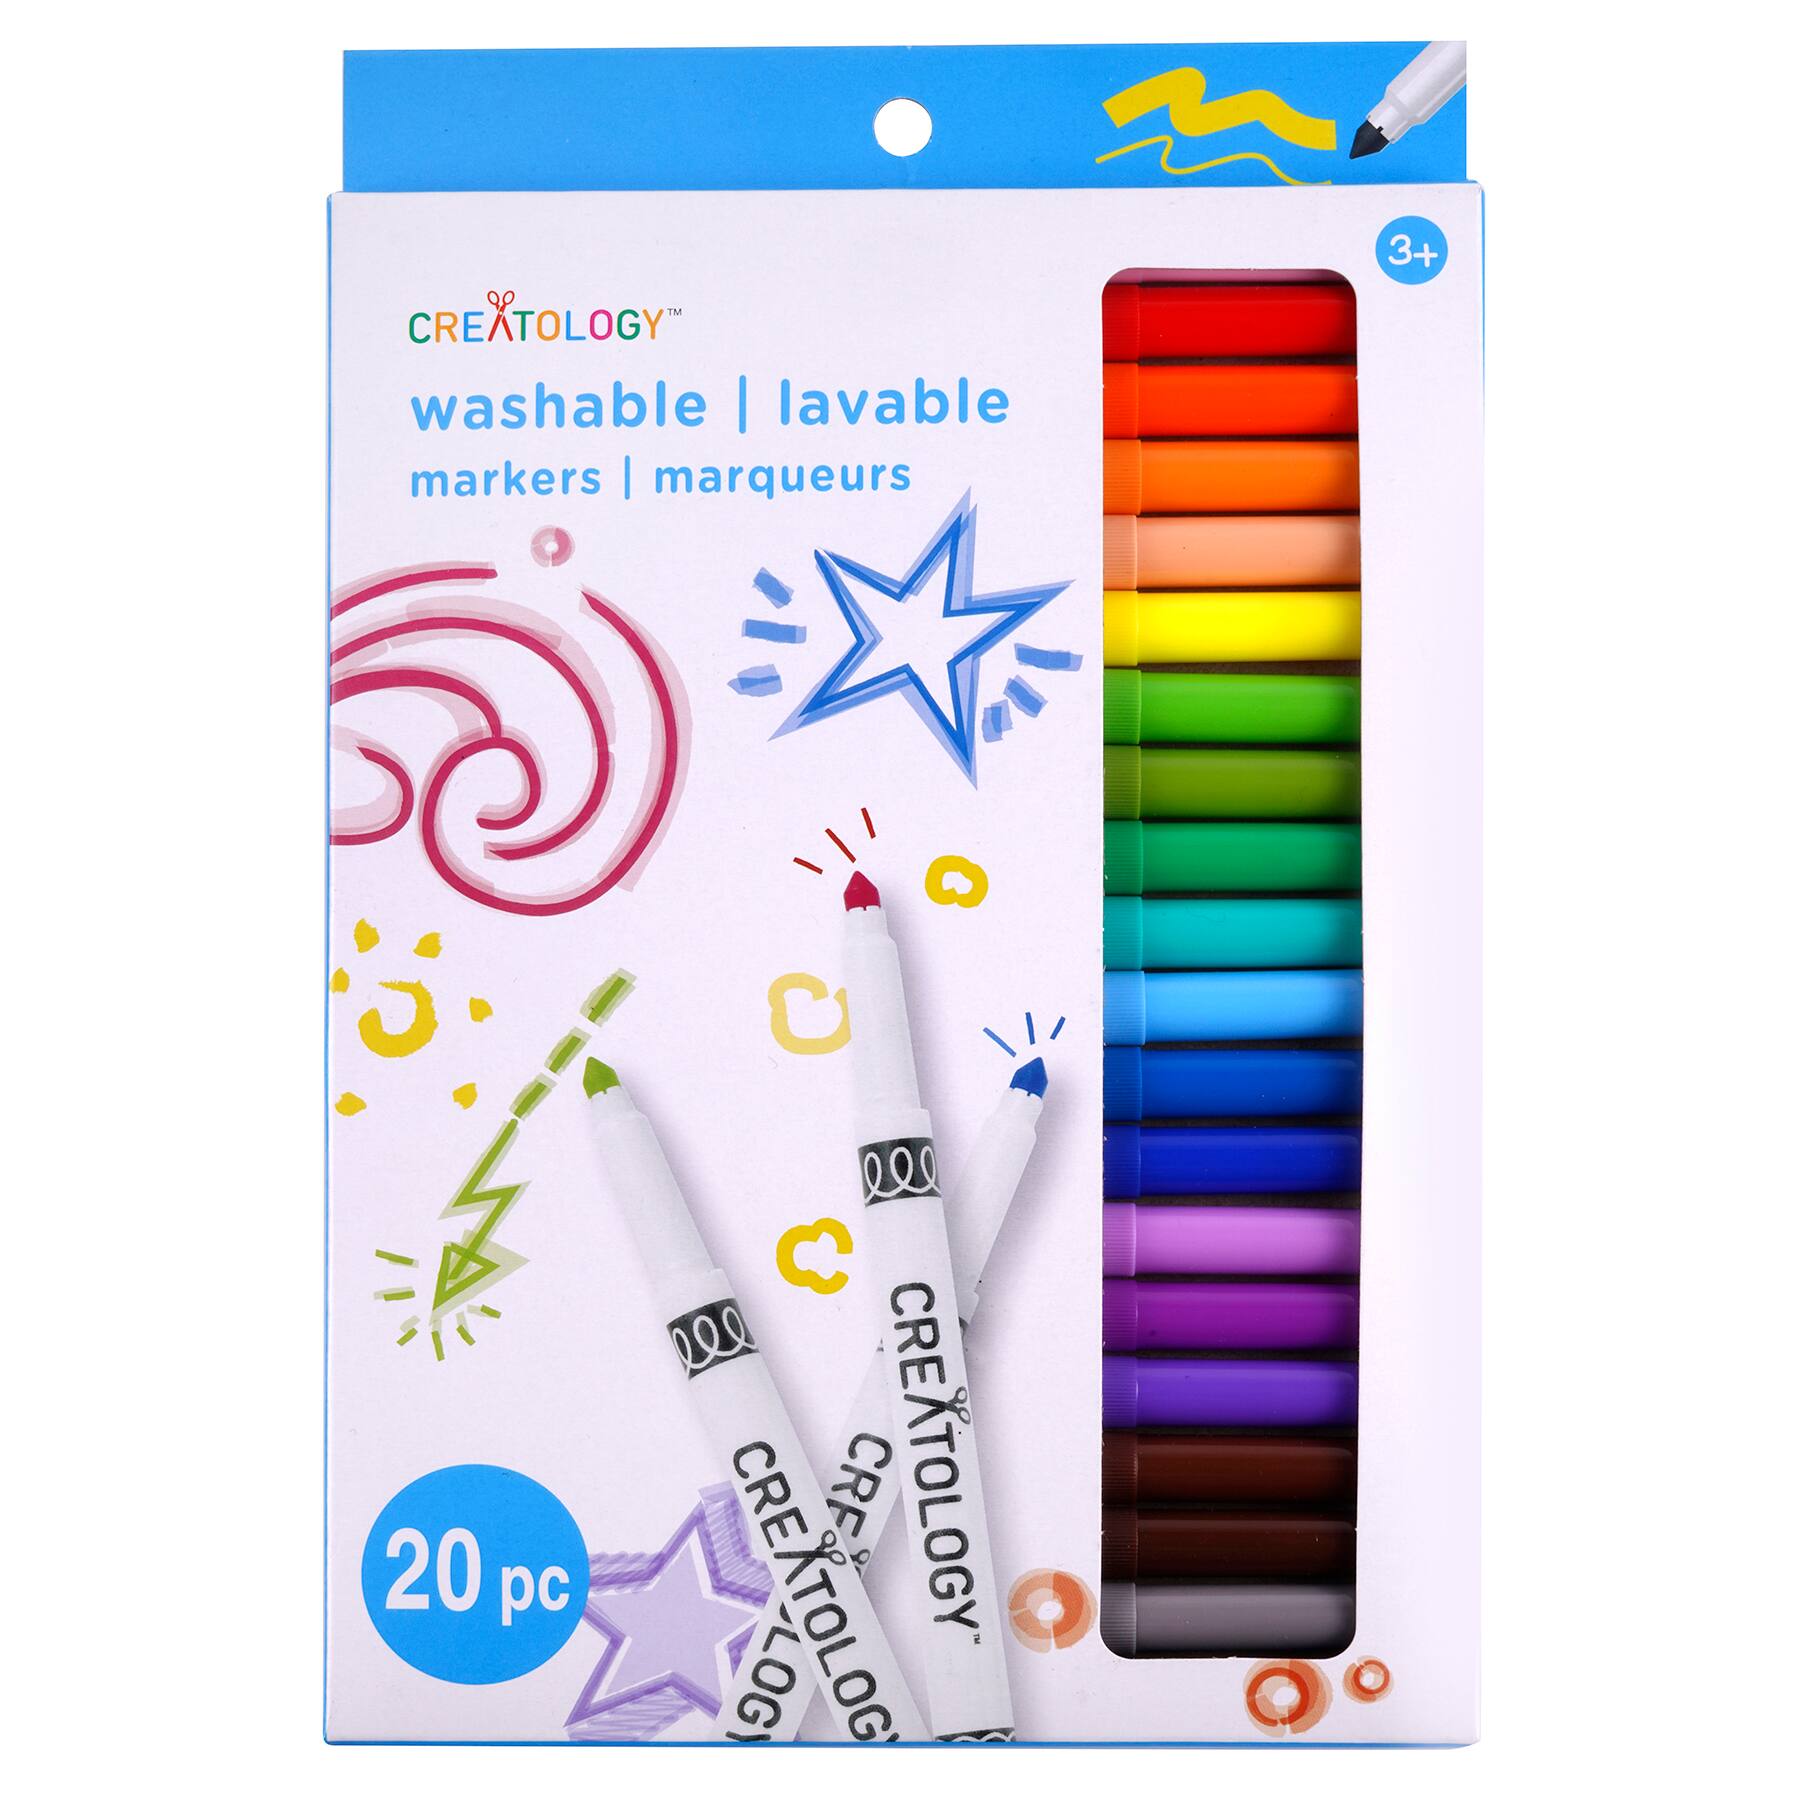 12 Packs: 20 ct. (240 total) Round Tip Washable Marker Set by